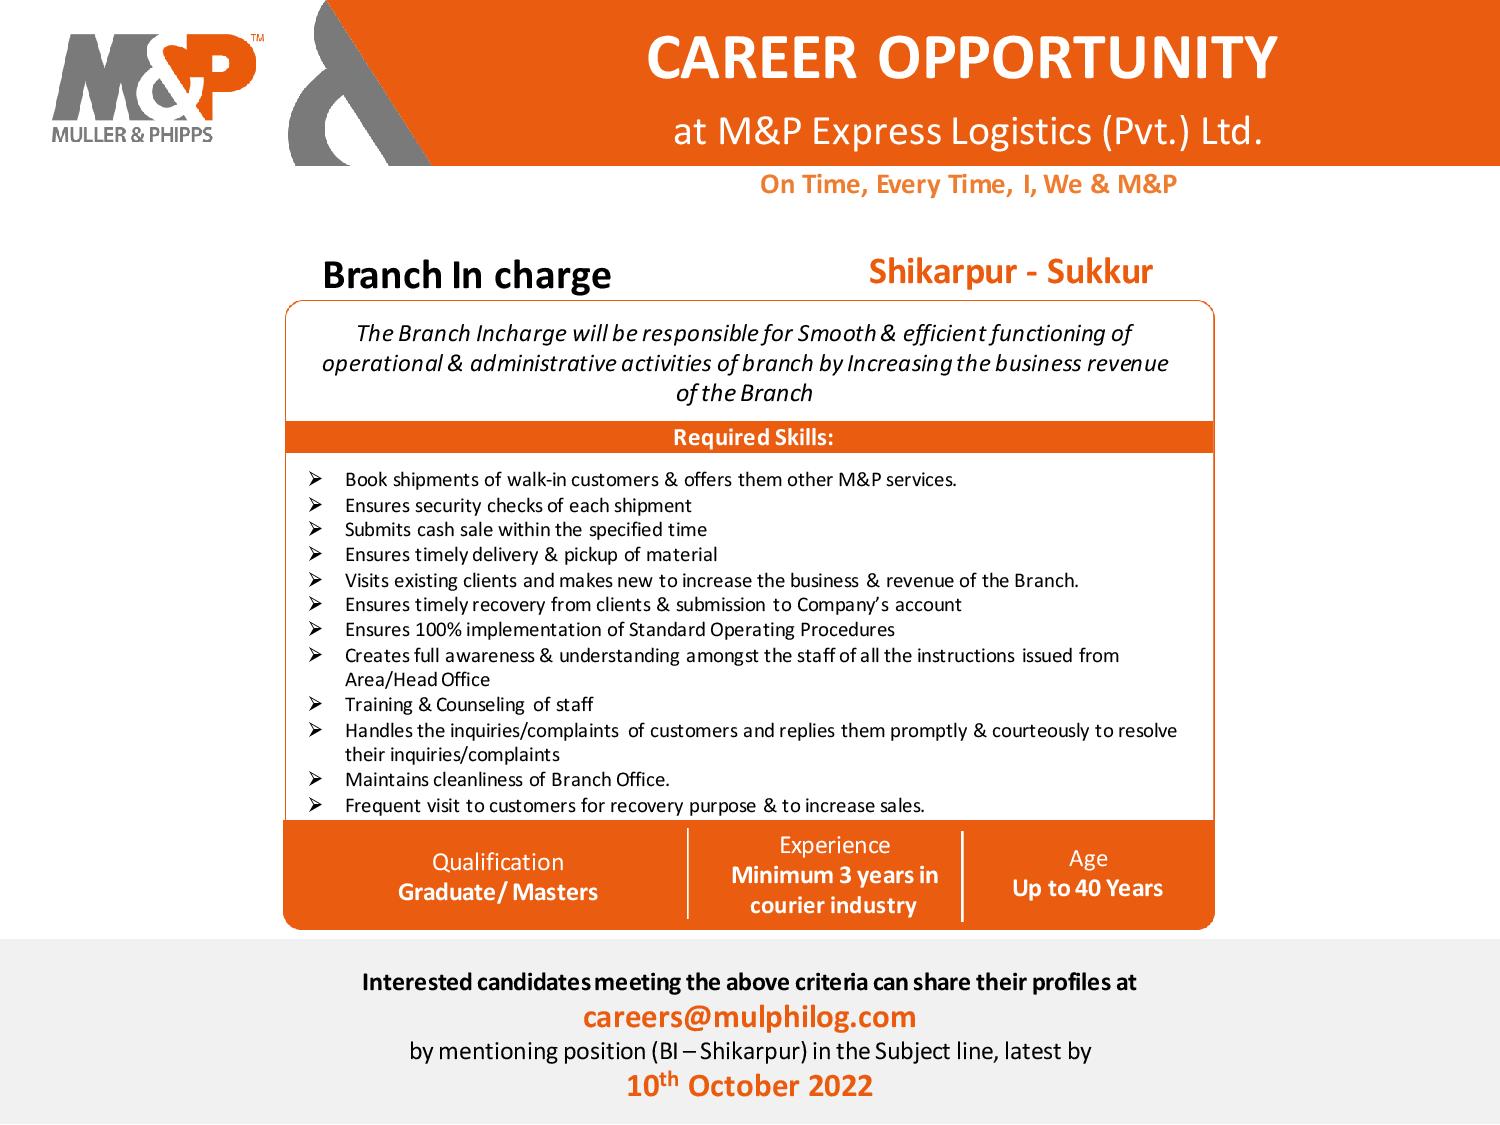 Branch In charge opportunity at M&P Express Logistics